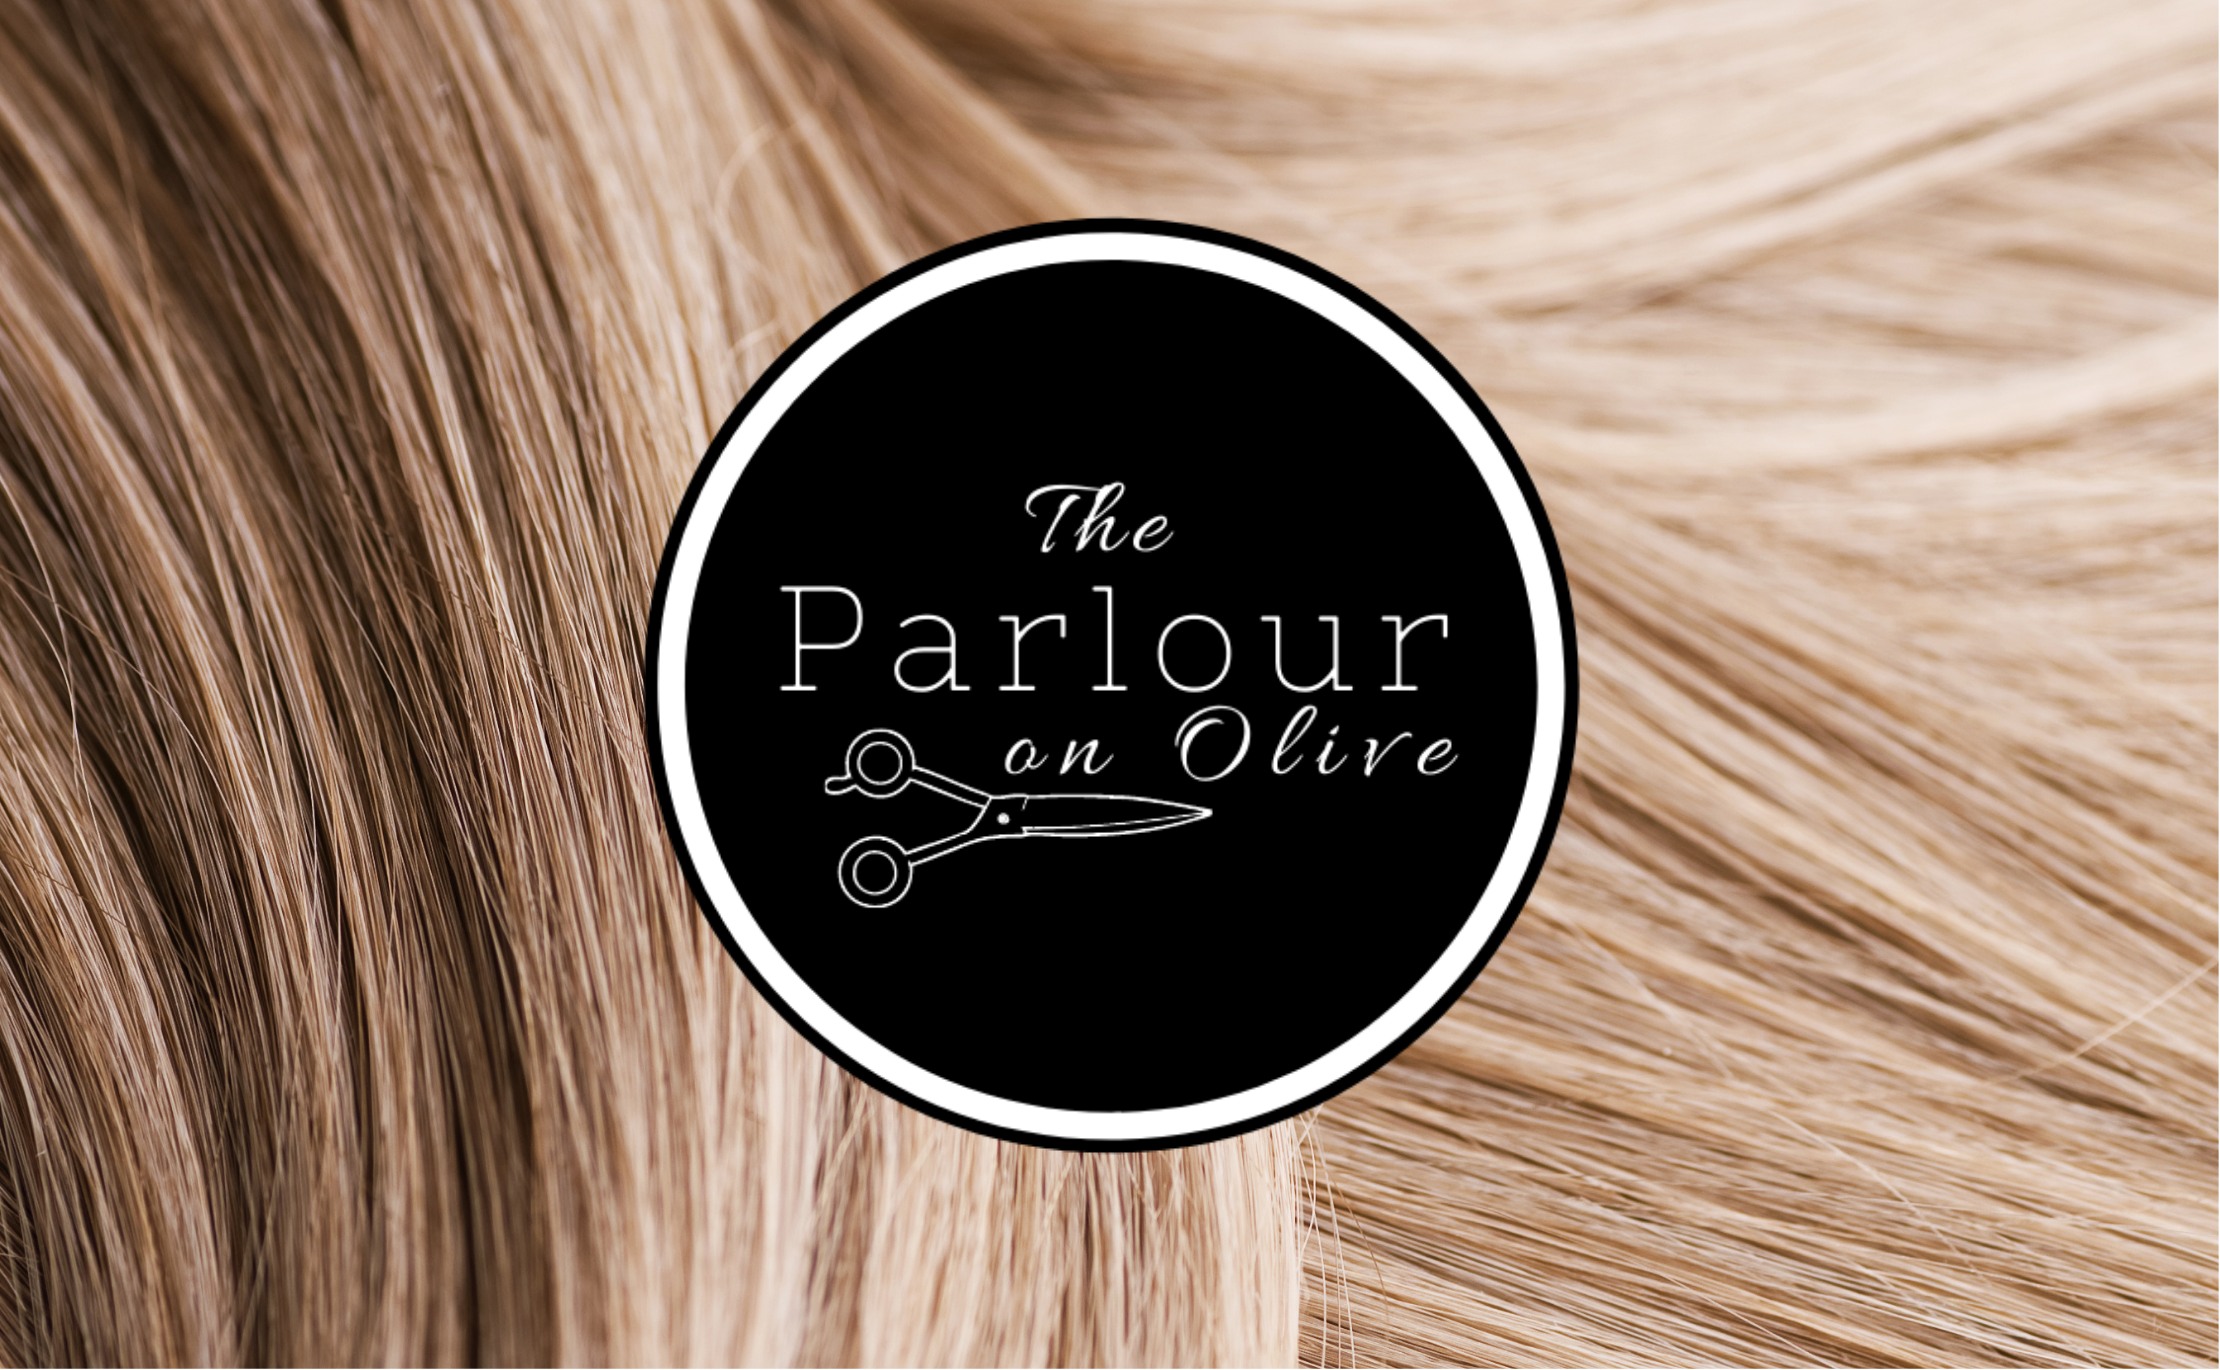 The Parlour on Olive